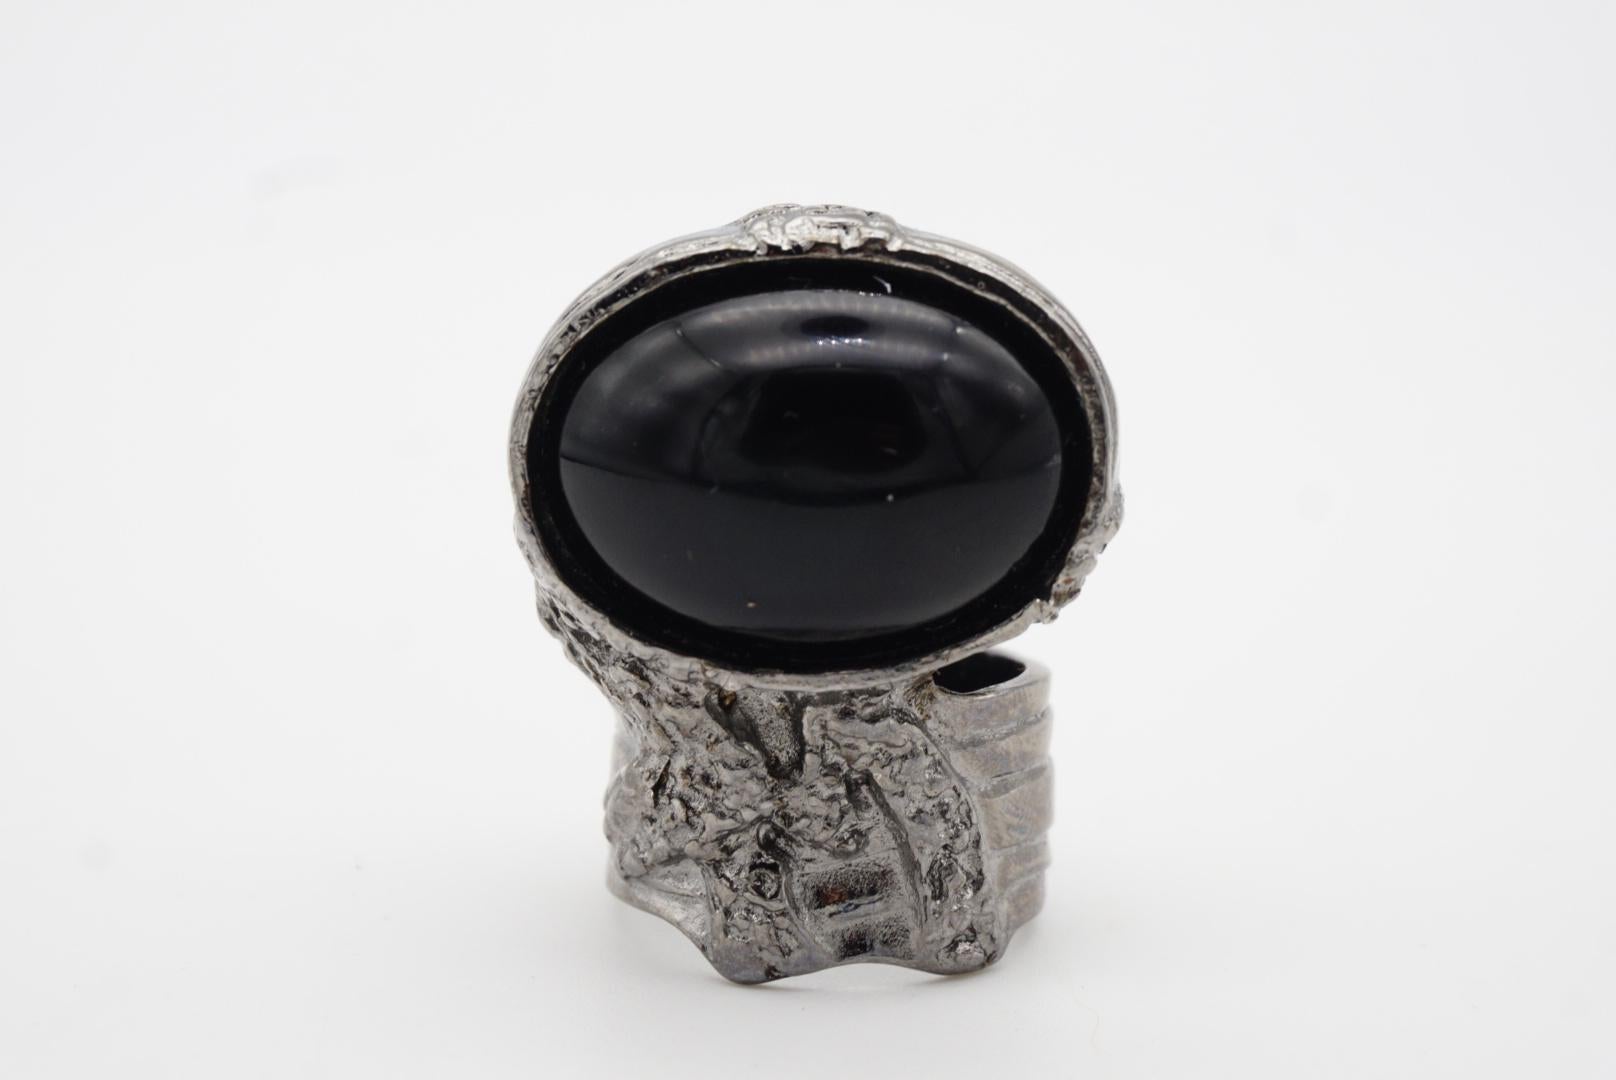 Yves Saint Laurent YSL Arty Black Chunky Statement Cabochon Silver Ring Size 8 For Sale 4